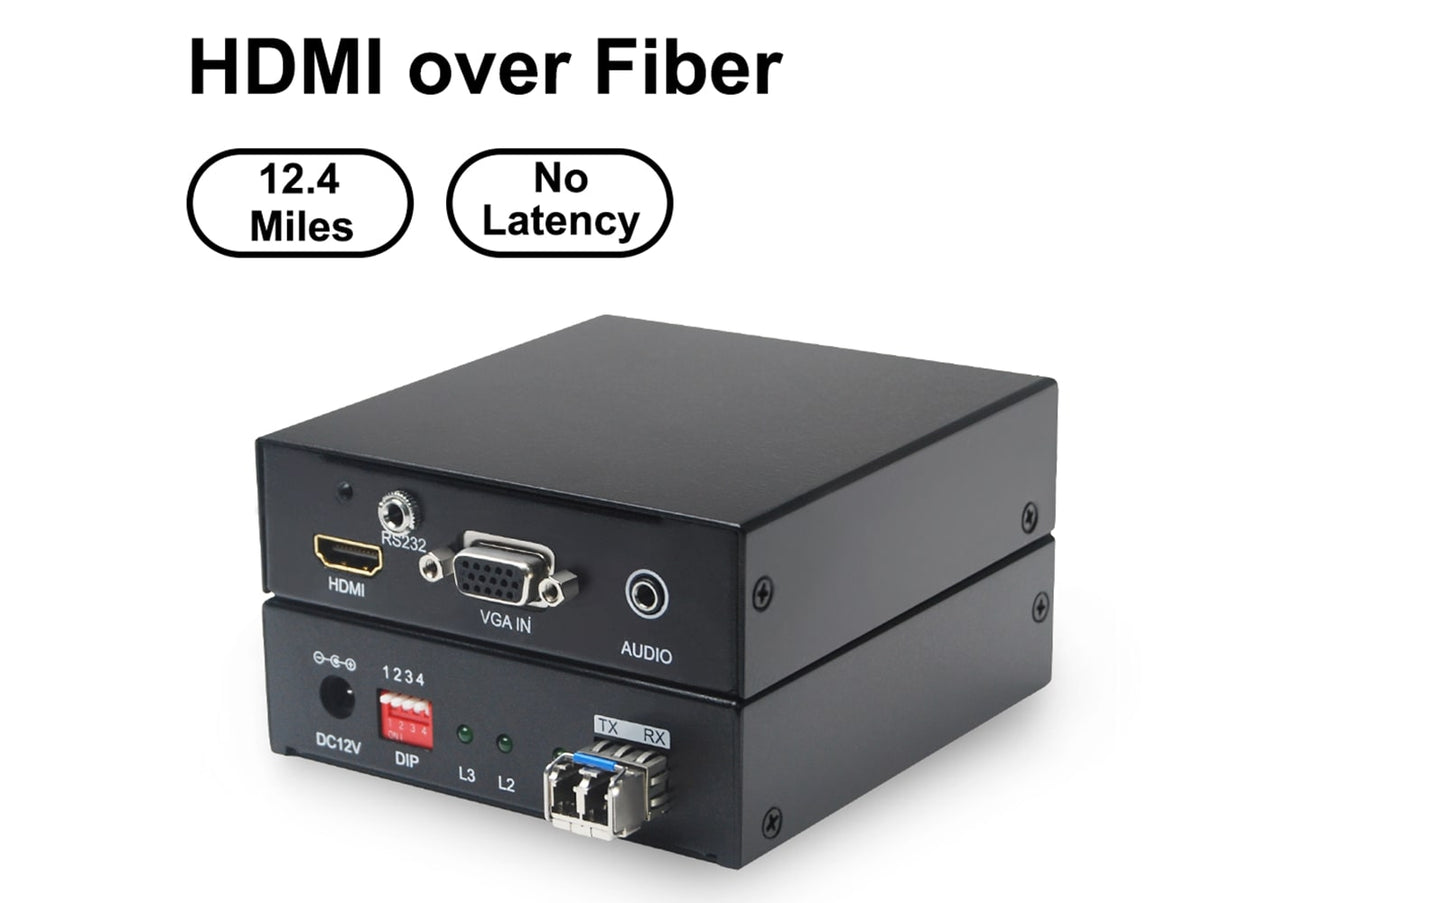 HD-F01 2K HDMI over Fiber Transmitter and Receiver